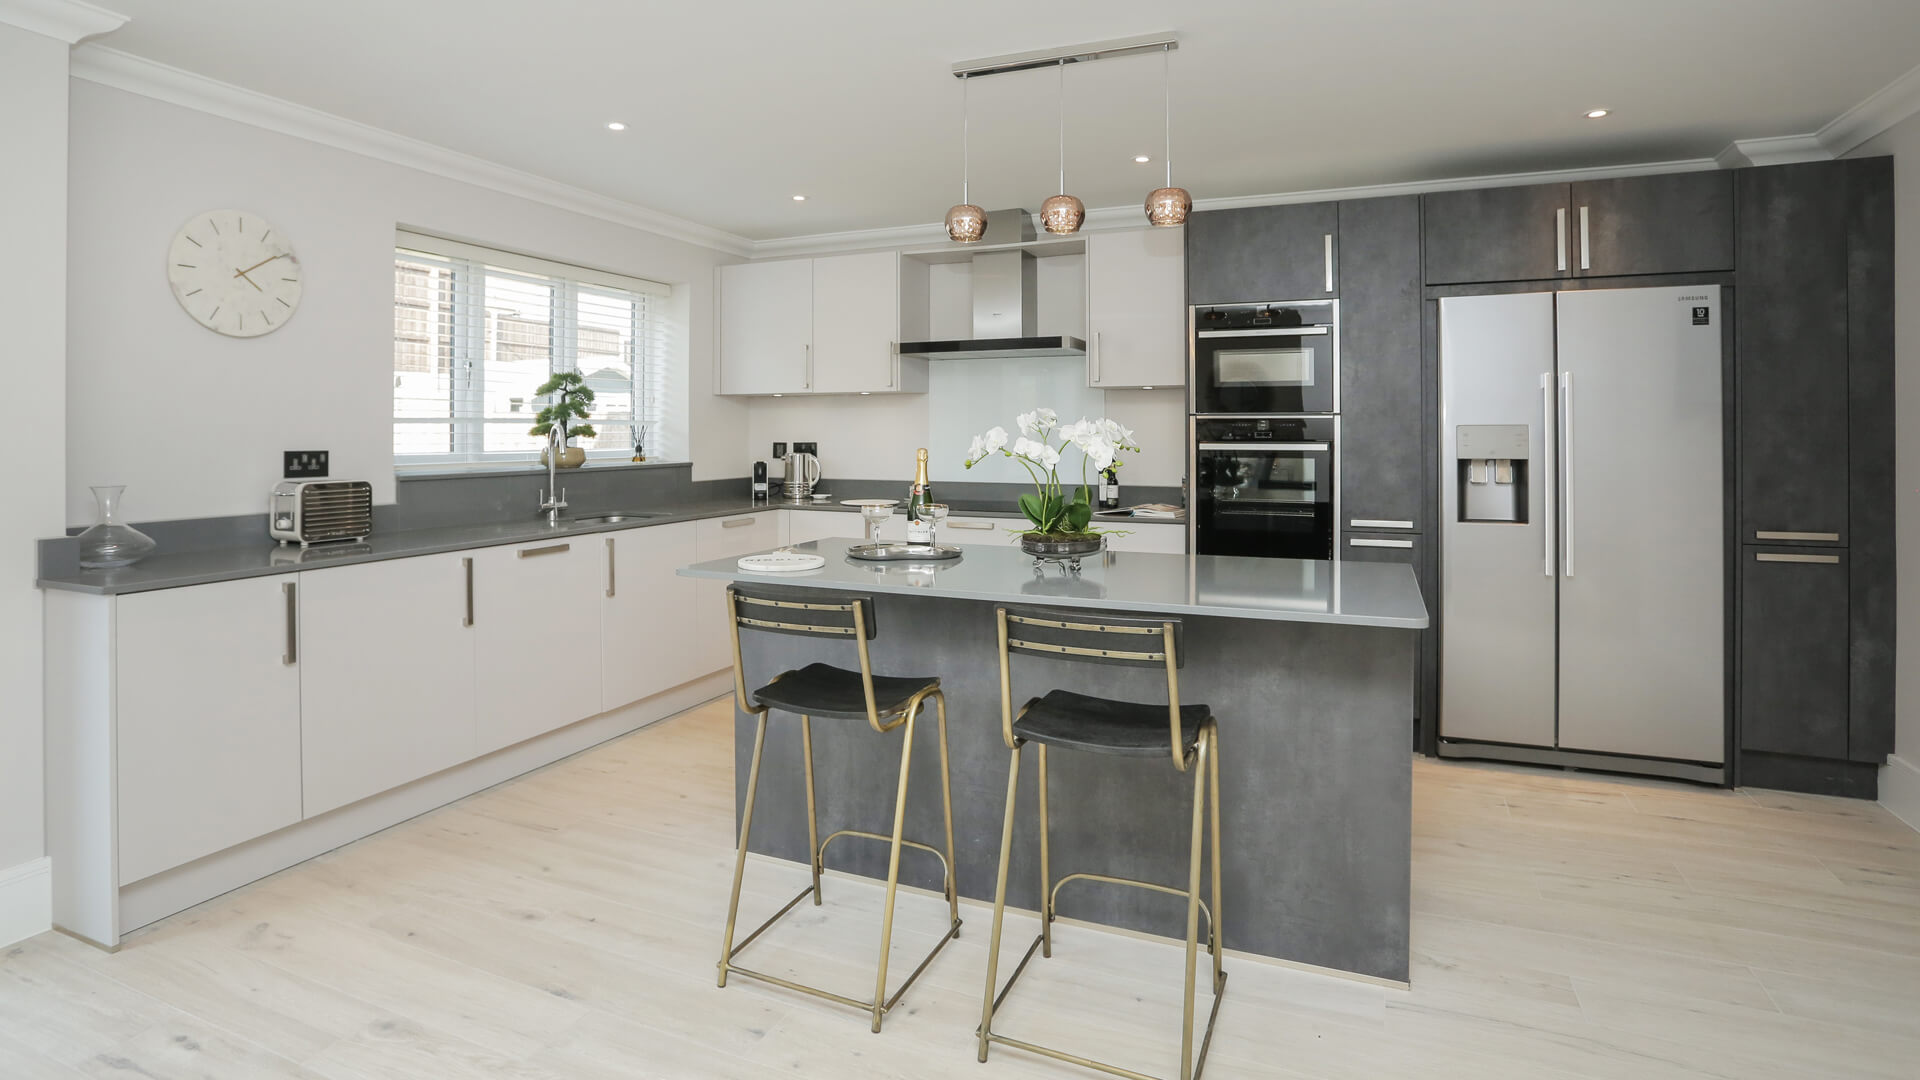 Fitted grey and white kitchen with breakfast bar at Woodside court.